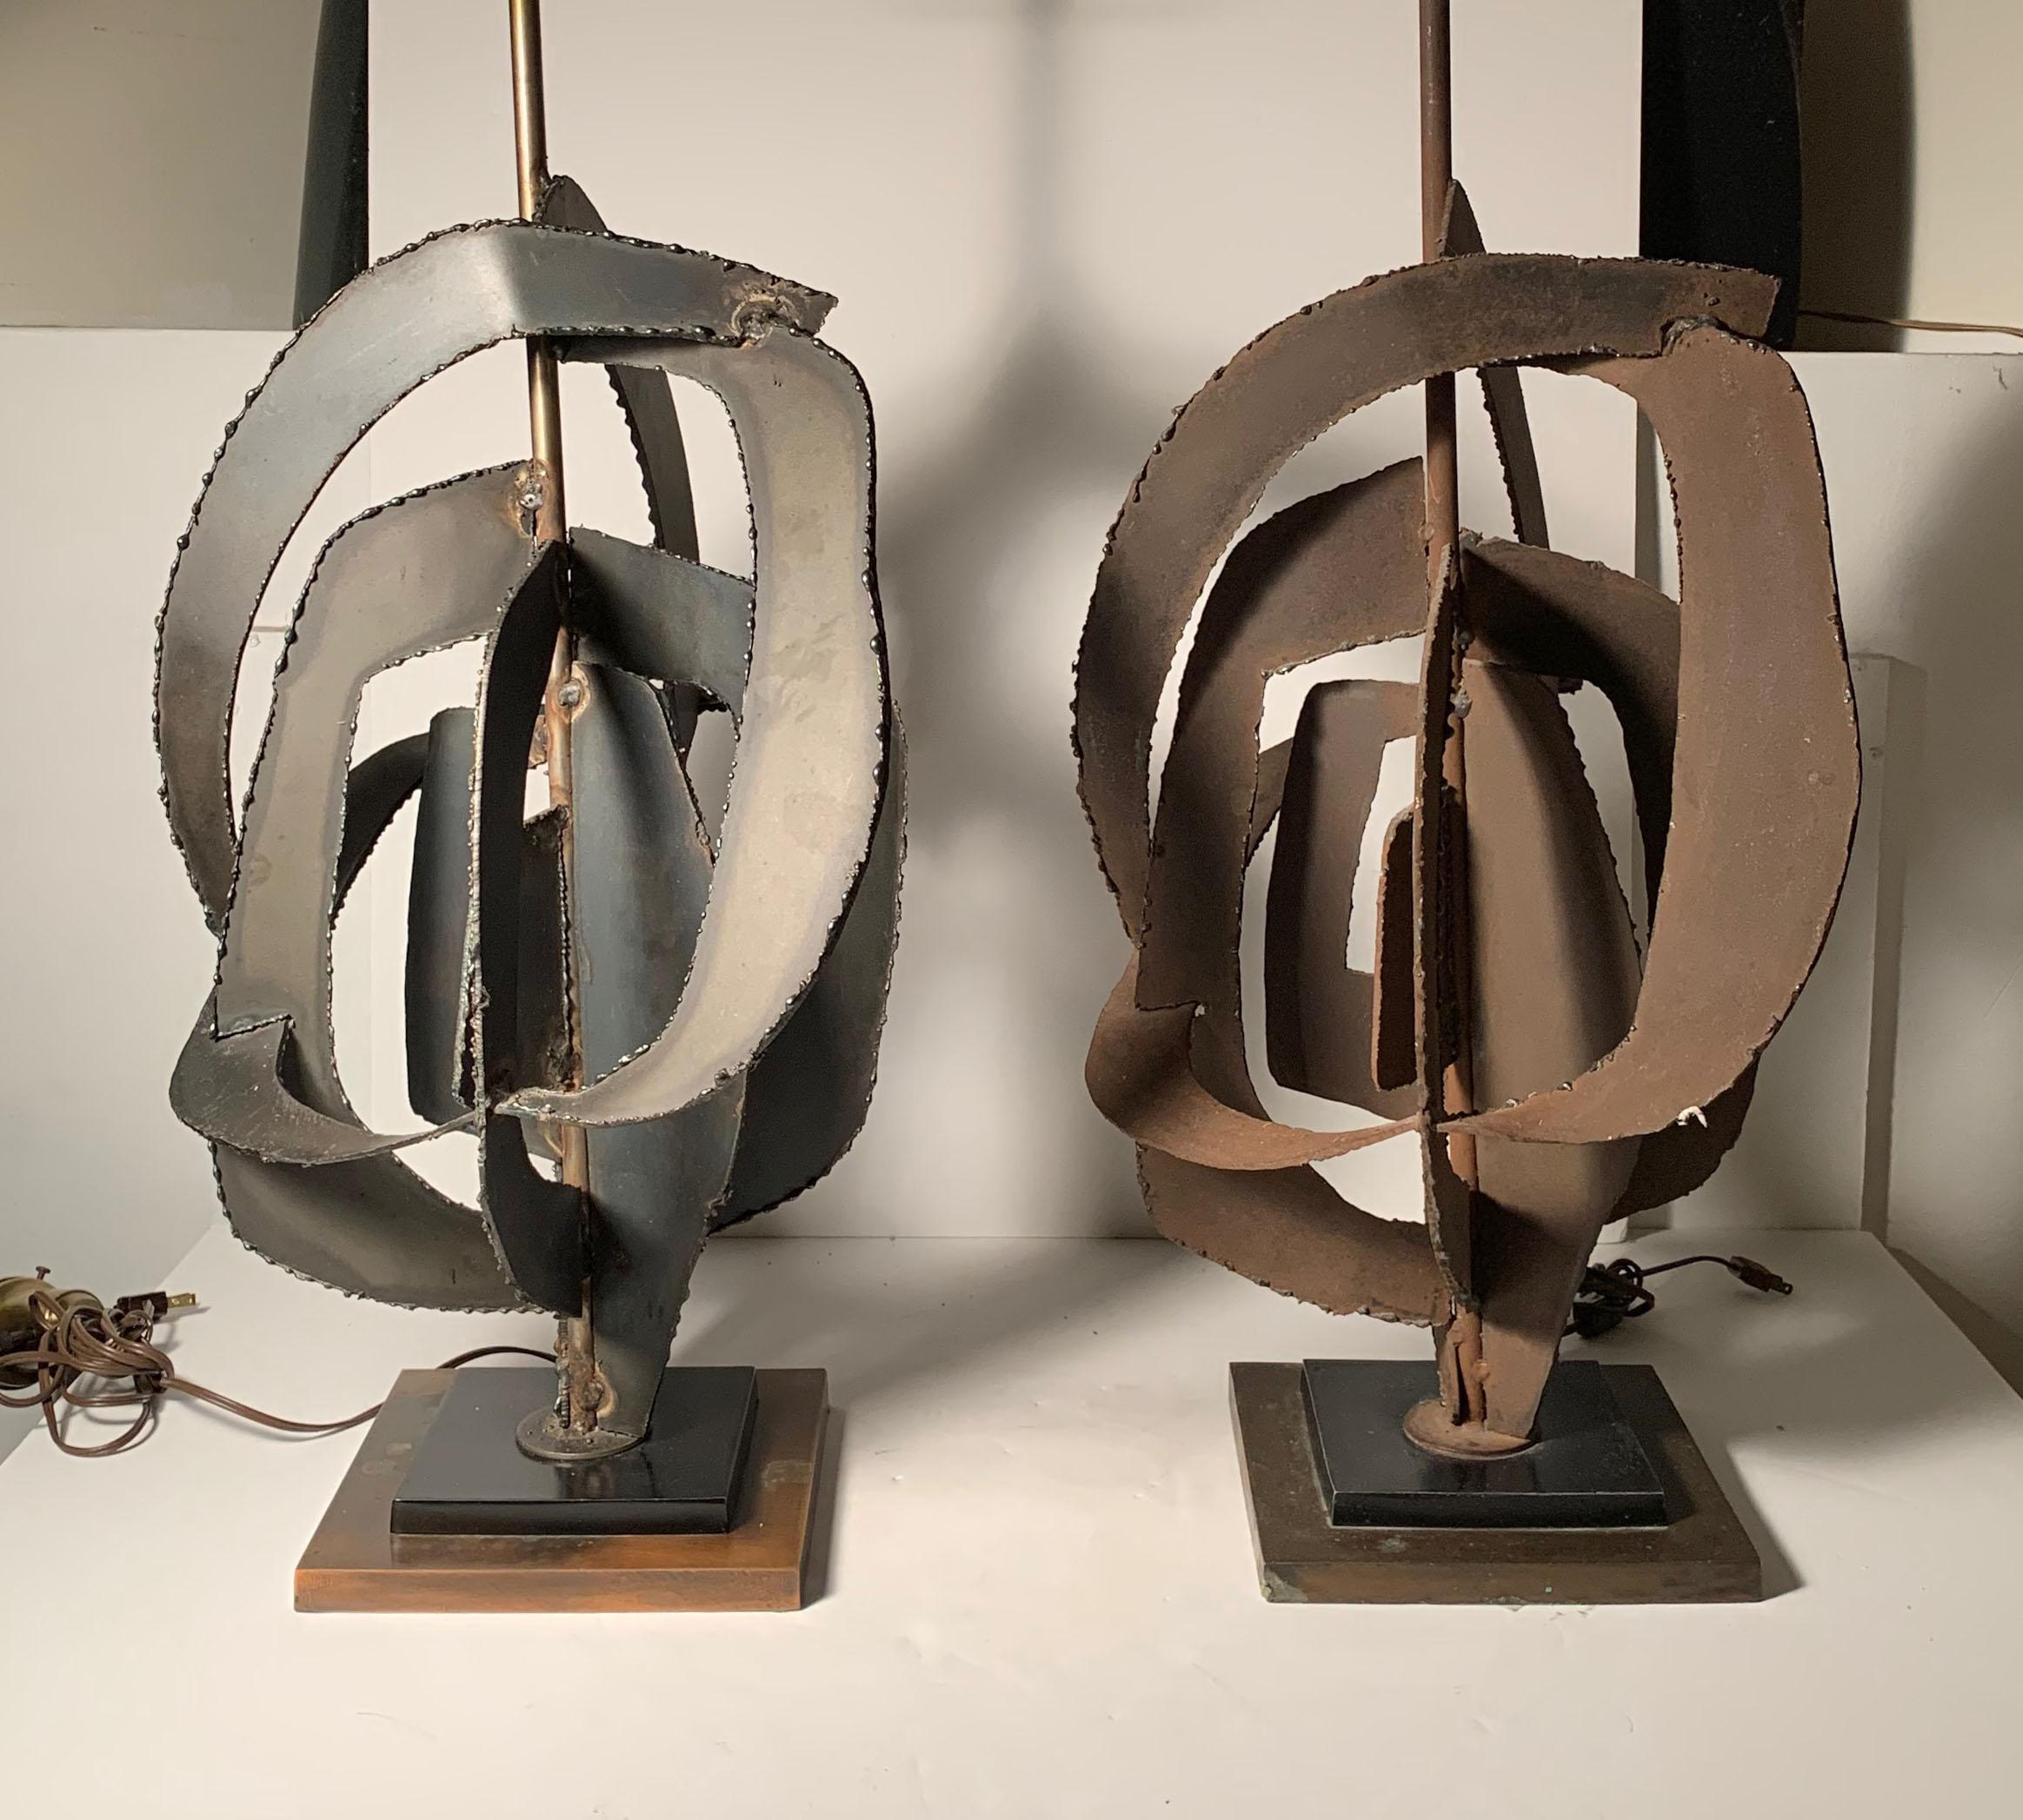 Pair of Richard Barr Brutalist lamps for Laurel. Price is for pair.

Finish on one has a light rust all-over. The other is more black. The lamps are matching. The design is based off a template.